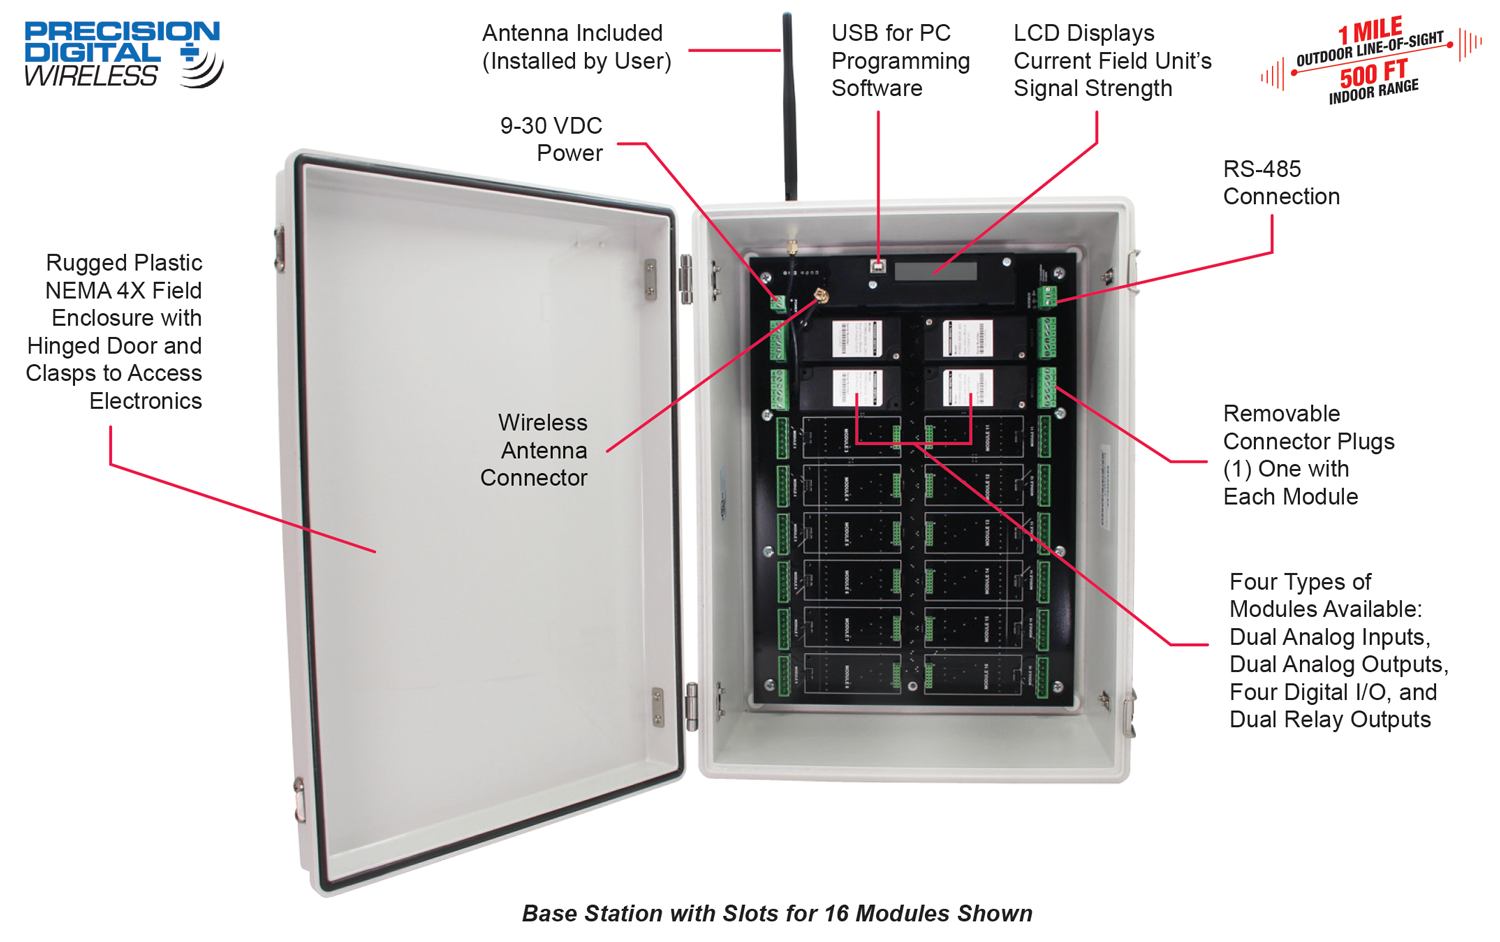 PDW90 Base Station Key Features Callouts